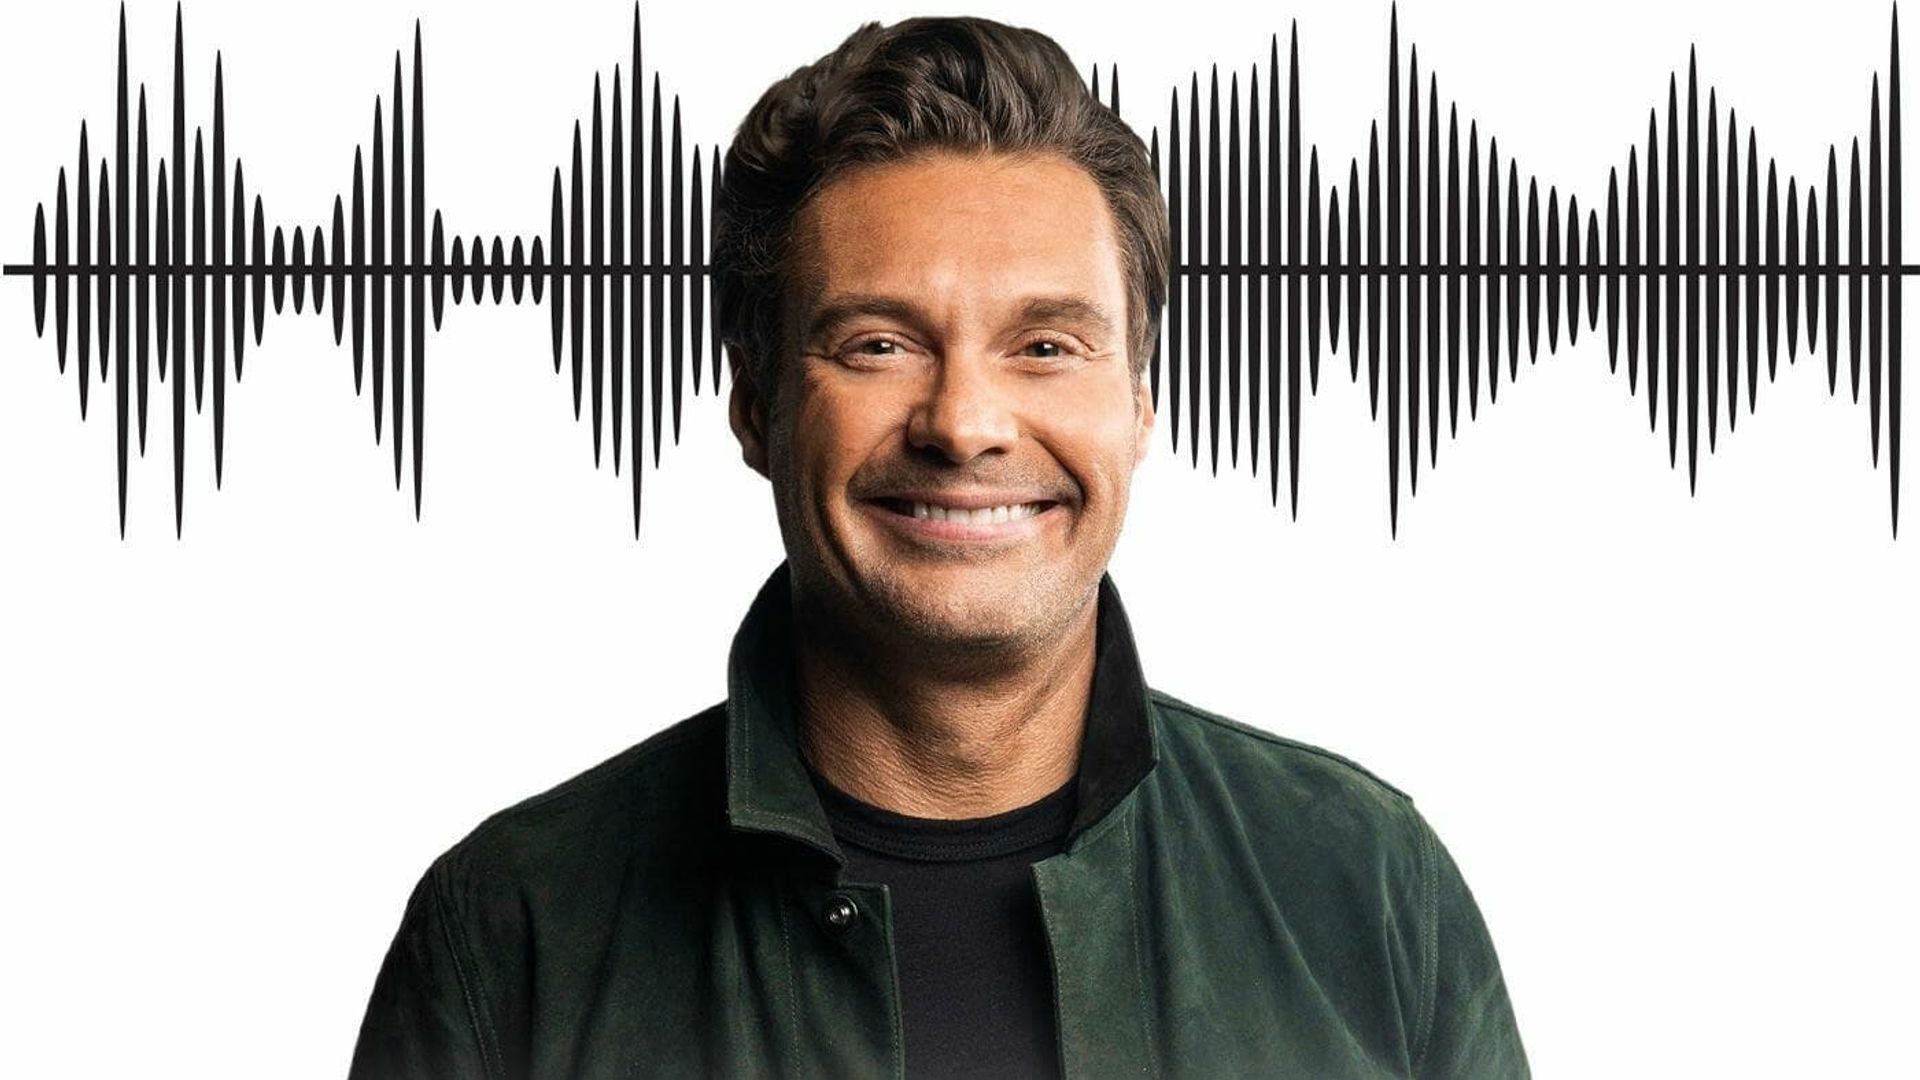 On-Air with Ryan Seacrest background